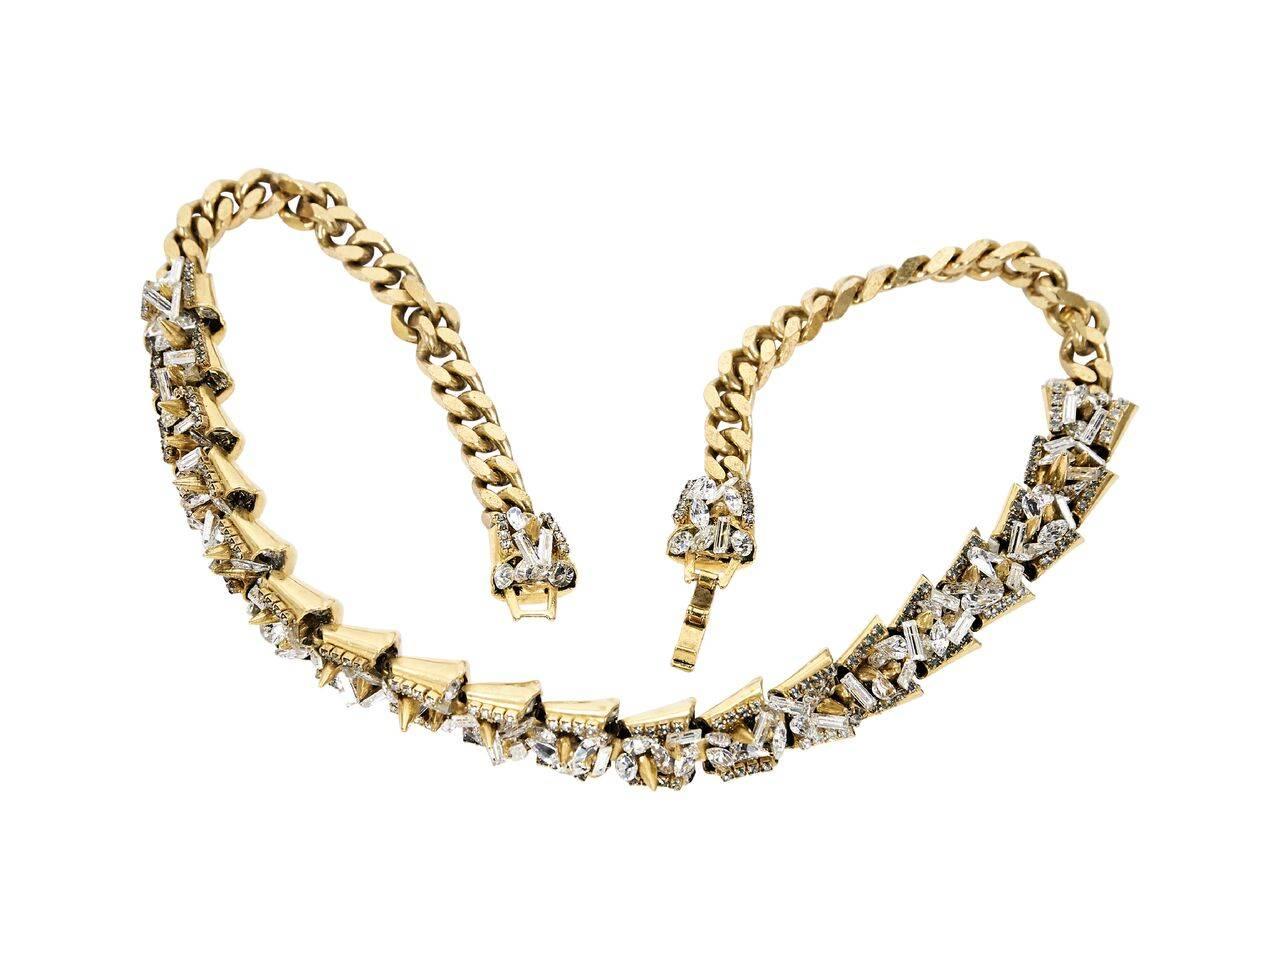 Product details:  Goldtone chain necklace by Erickson Beamon.  Embellished with crystals.  Flip-clasp closure. 
Condition: Pre-owned. Very good.
Est. Retail $ 678.00